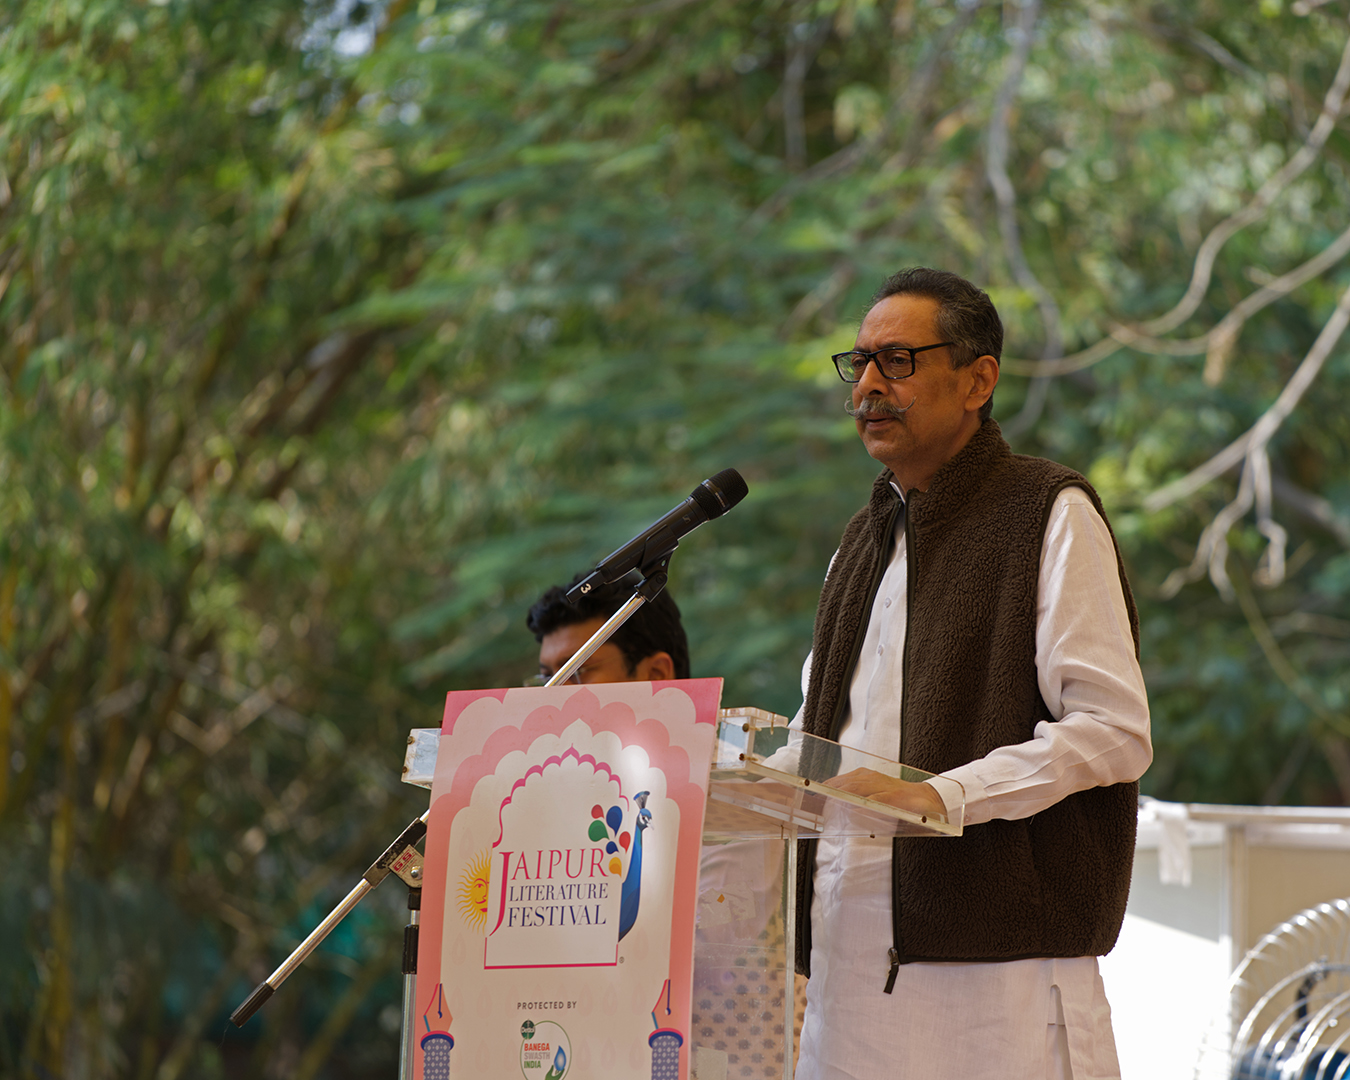 The 15th edition of the Jaipur Literature Festival celebrates literature, art and music at its new home